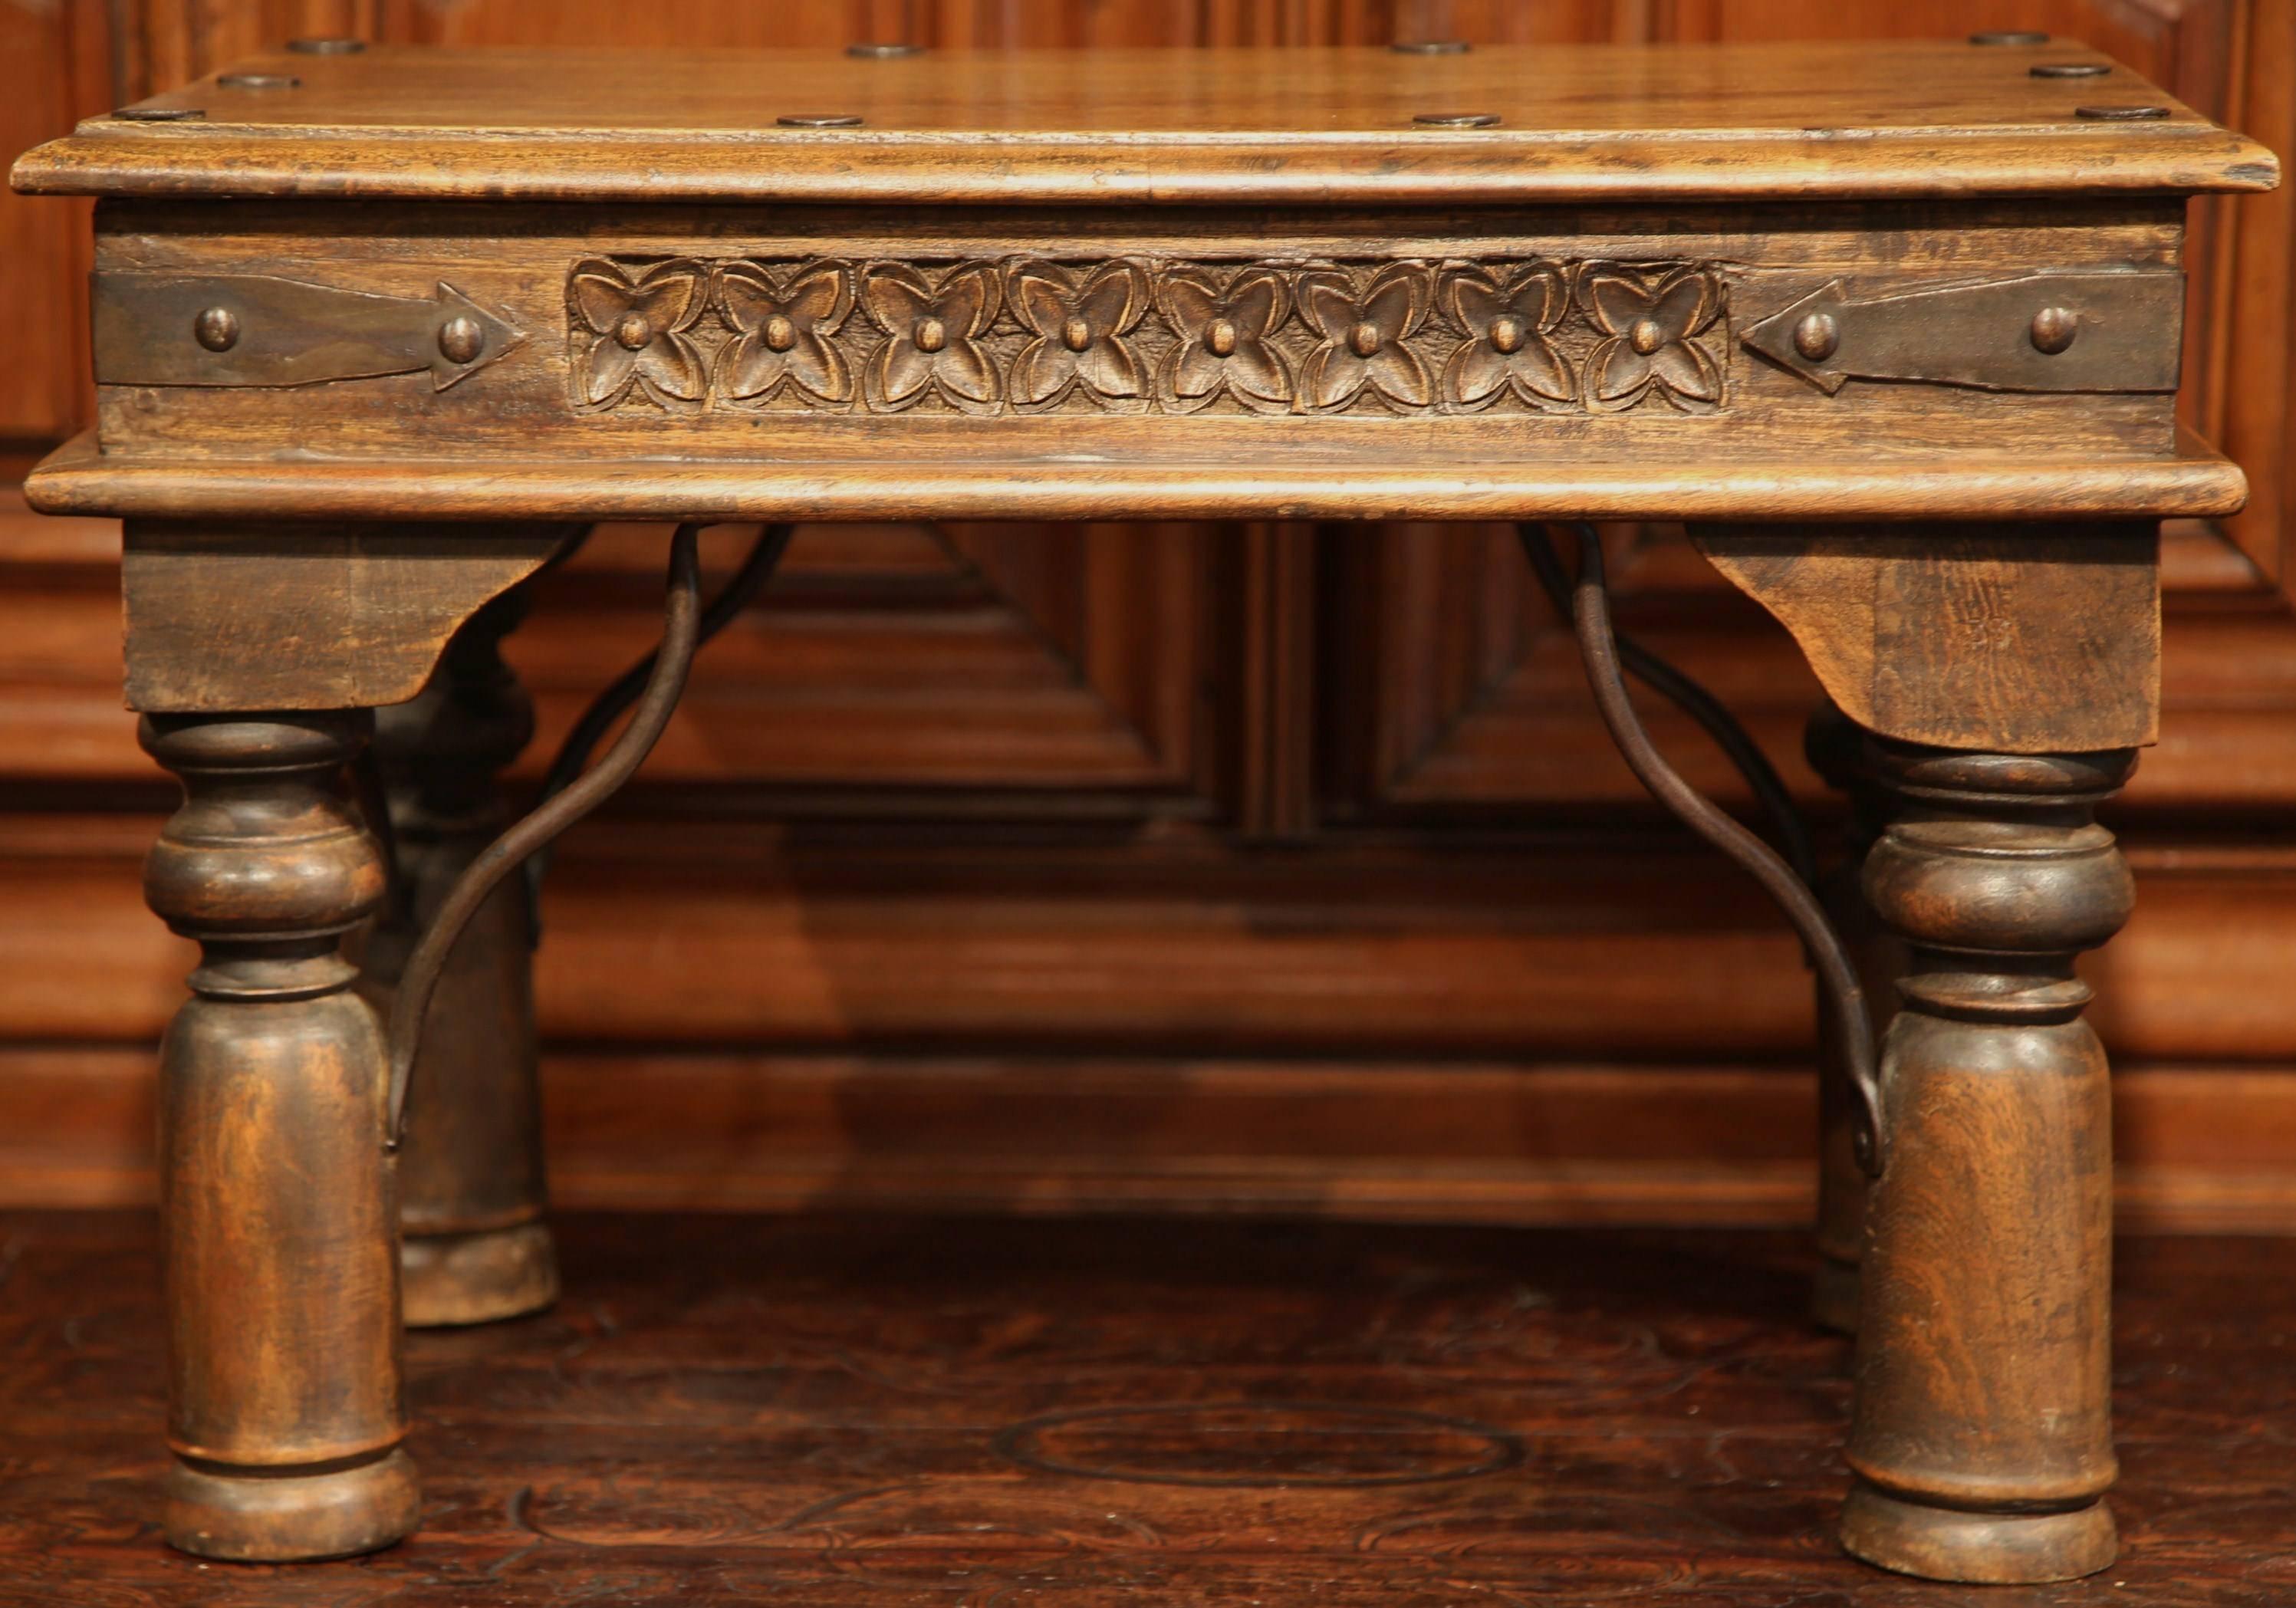 Hand-Carved Small Mid-20th Century Spanish Carved Walnut Coffee Table with Iron Accents